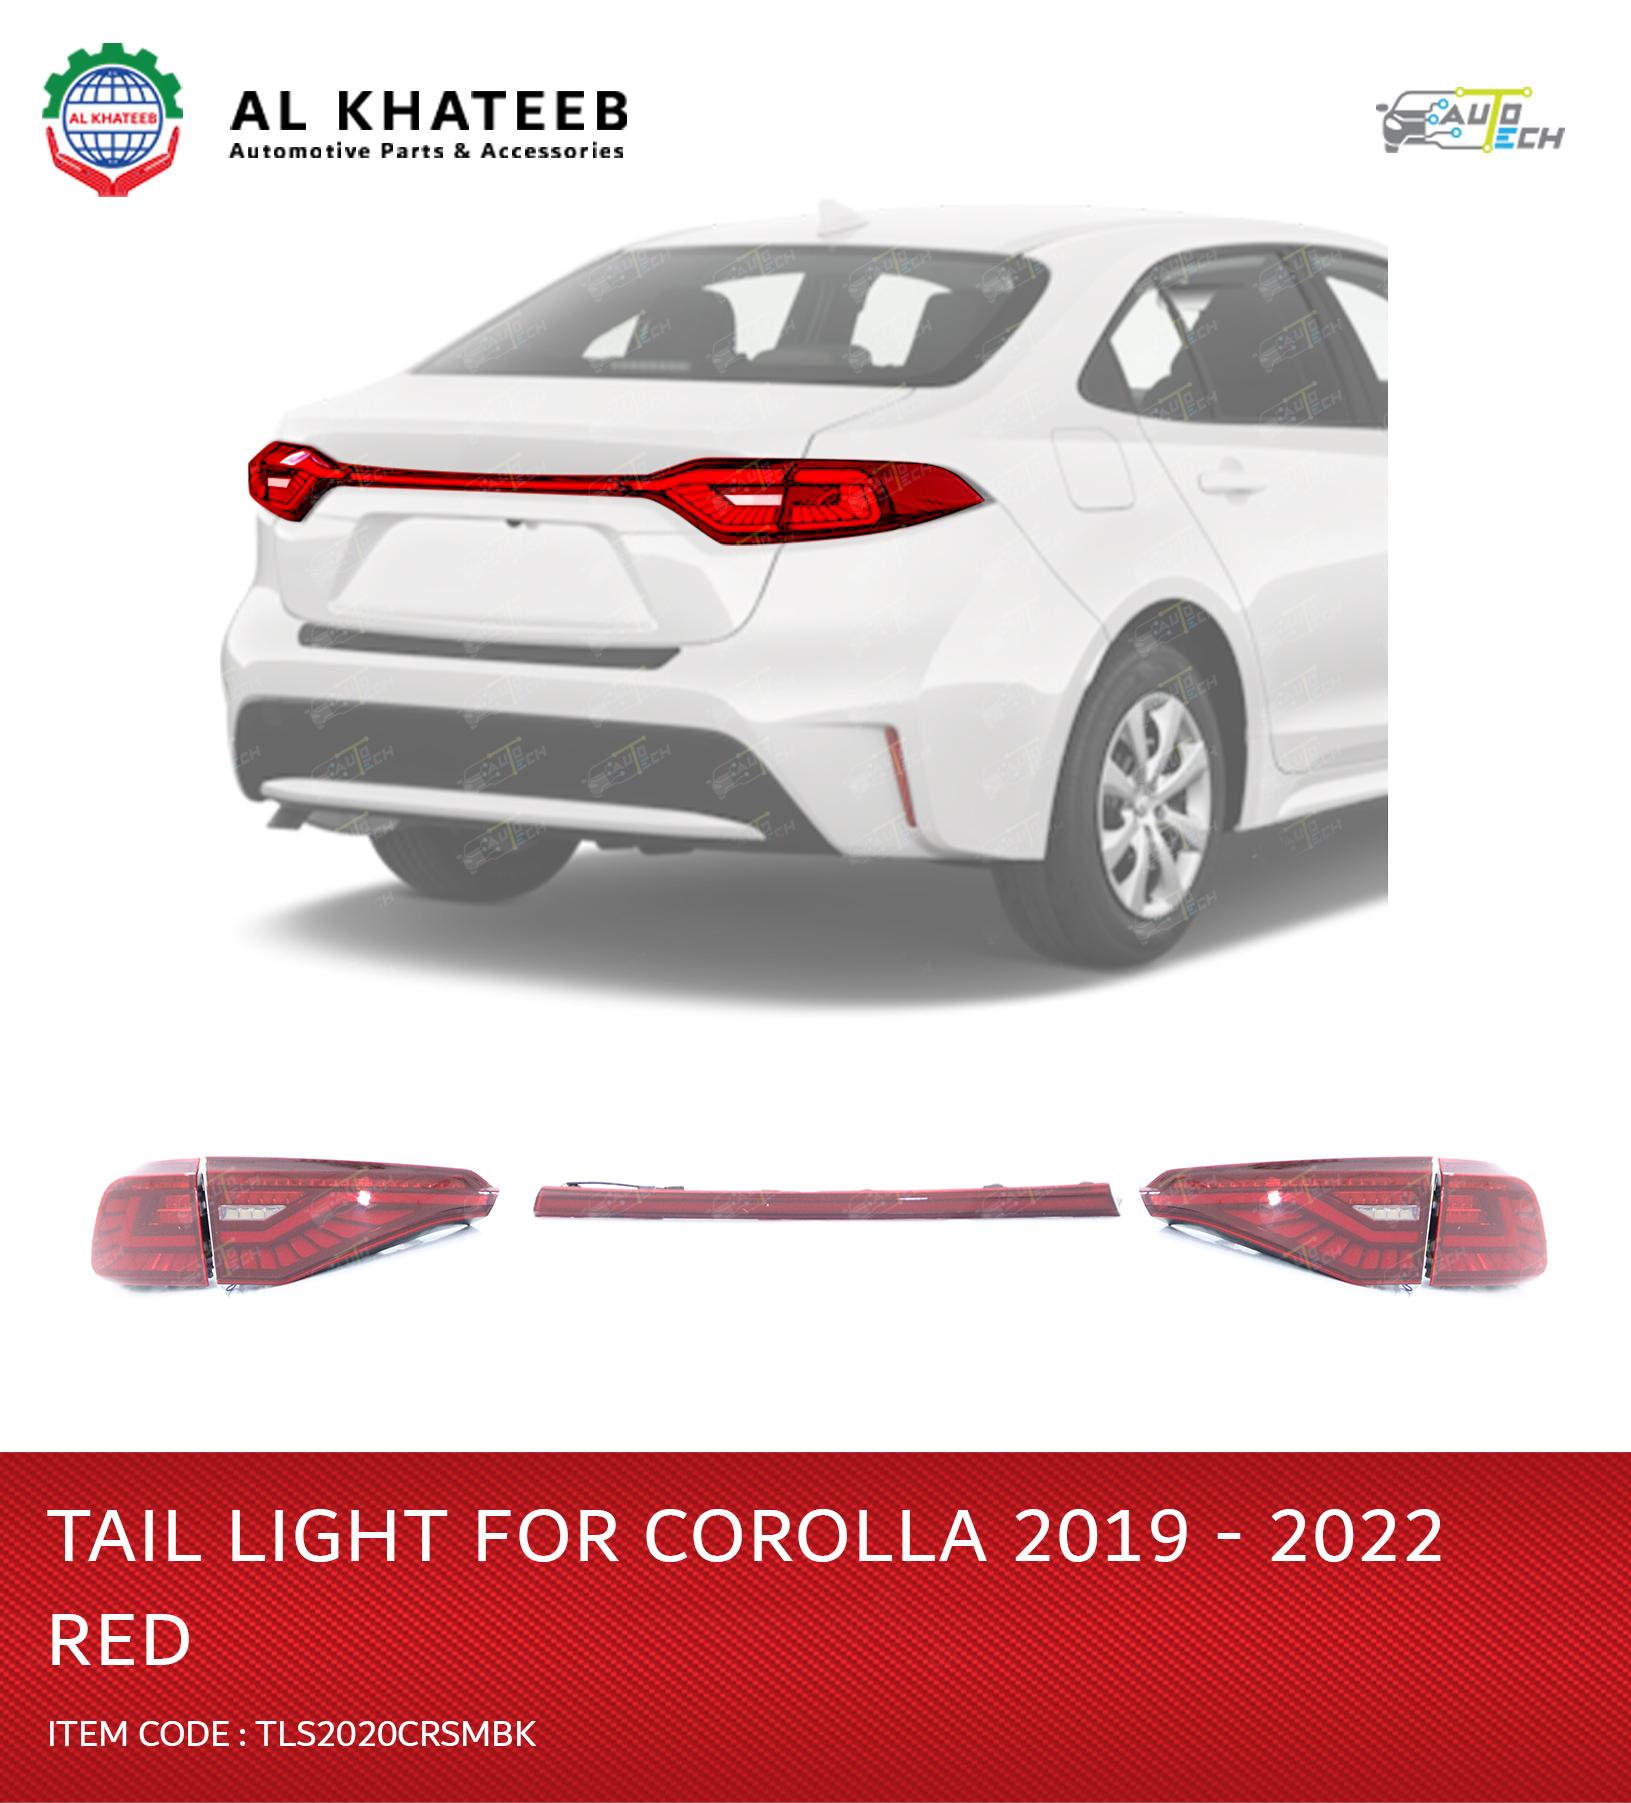 TAIL LIGHT FOR TOYOTA COROLLA 2019-22 RED